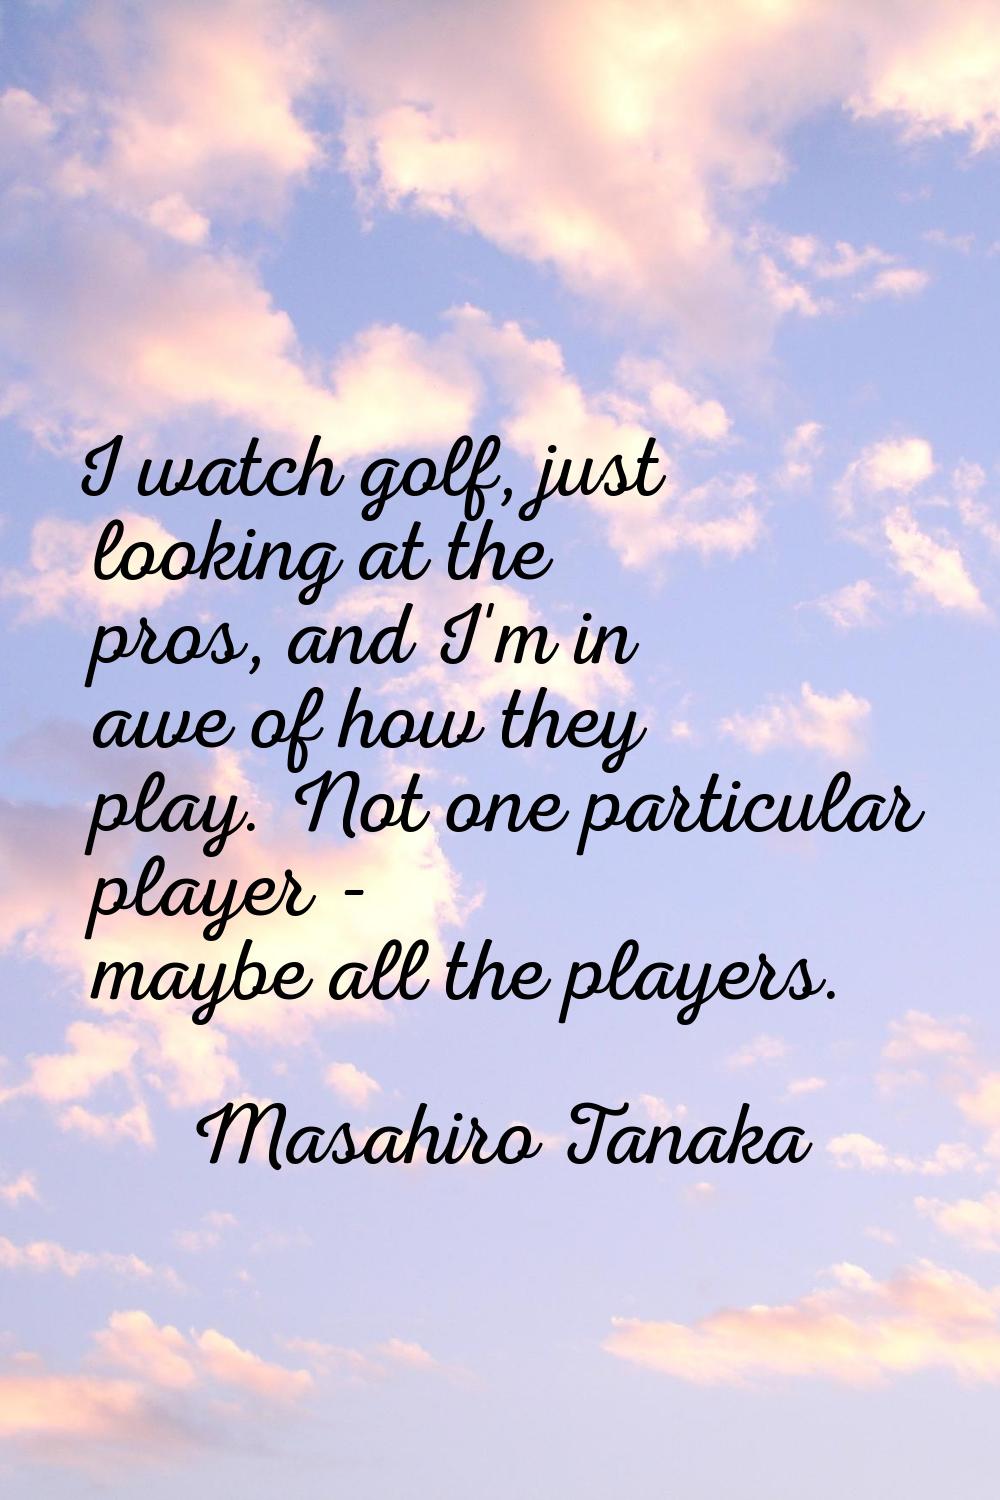 I watch golf, just looking at the pros, and I'm in awe of how they play. Not one particular player 